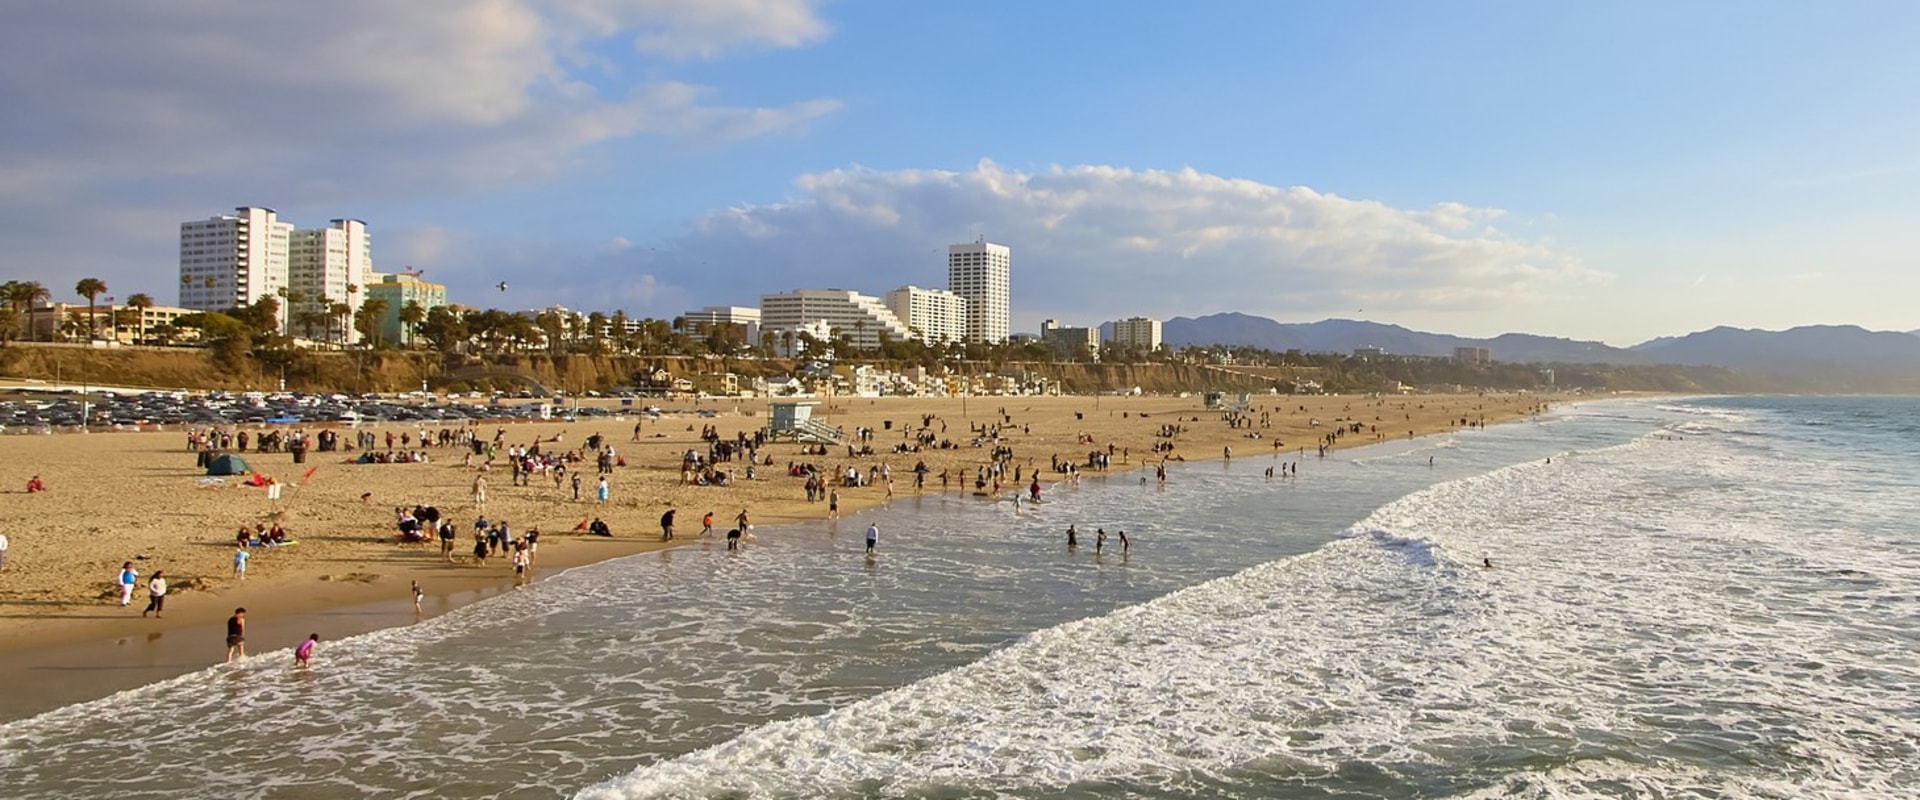 Are los angeles beaches safe?